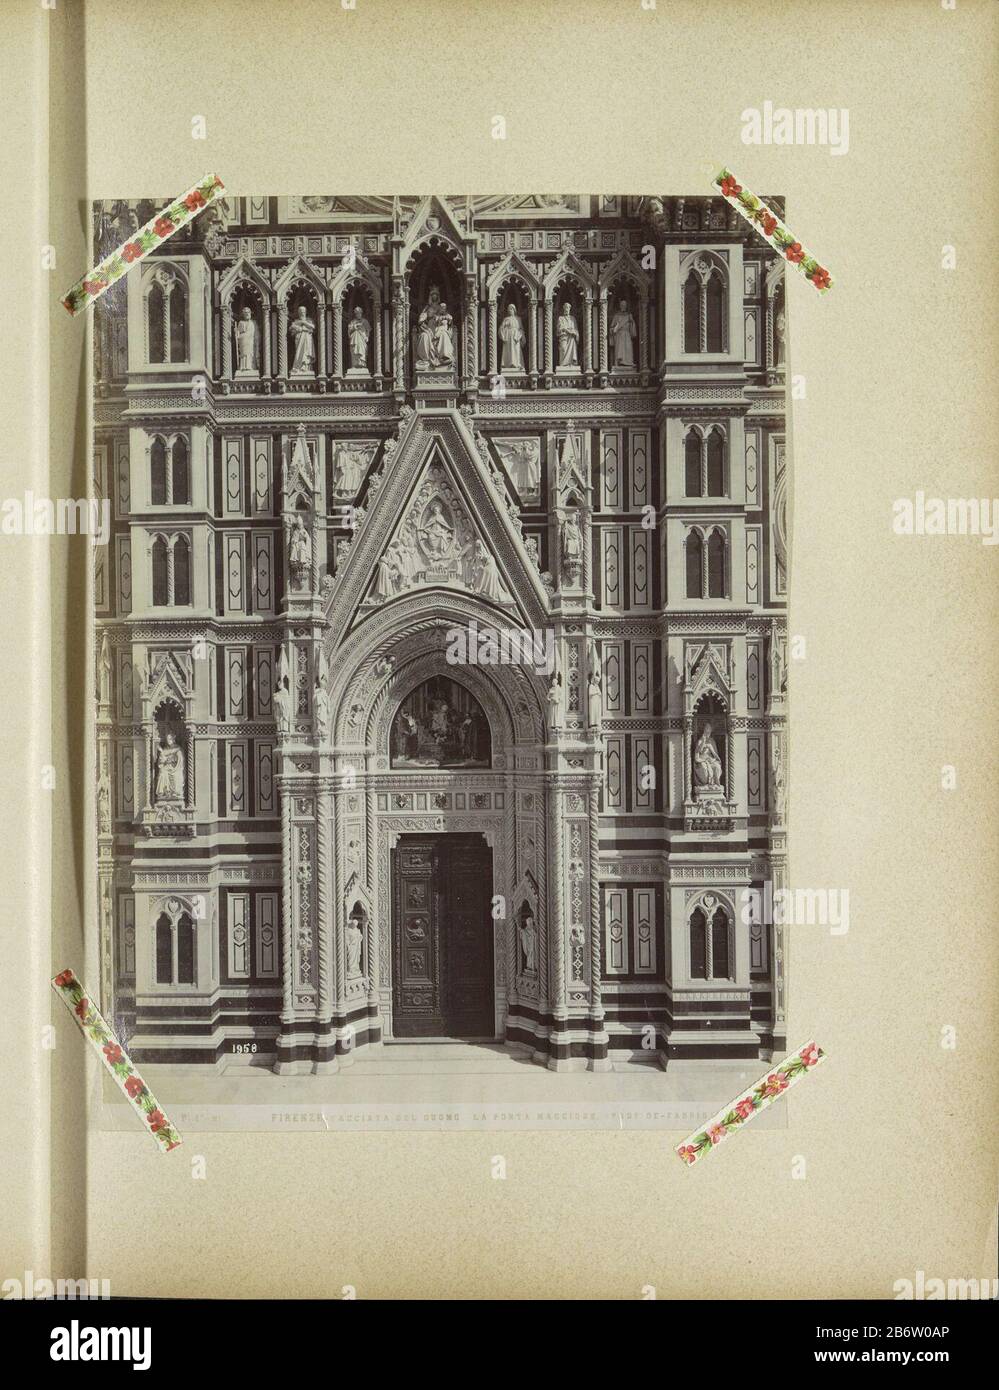 Hoofdportaal van de kathedraal van Florence Firenze - Facciata del Duomo La porta maggiore (Prof De Frabris) (titel op object) Part of album with which to examine recordings: conditions in Italian cities and kunstwerken. Manufacturer : photographer: Alinari (possible) Place manufacture: Florence Date: ca. 1860 - ca. 1900 Physical features: albumen print material: paper Technique: albumen print dimensions: photo: h 258 mm × W 190 mm Subject: parts of church exterior and annexes: portal Stock Photo